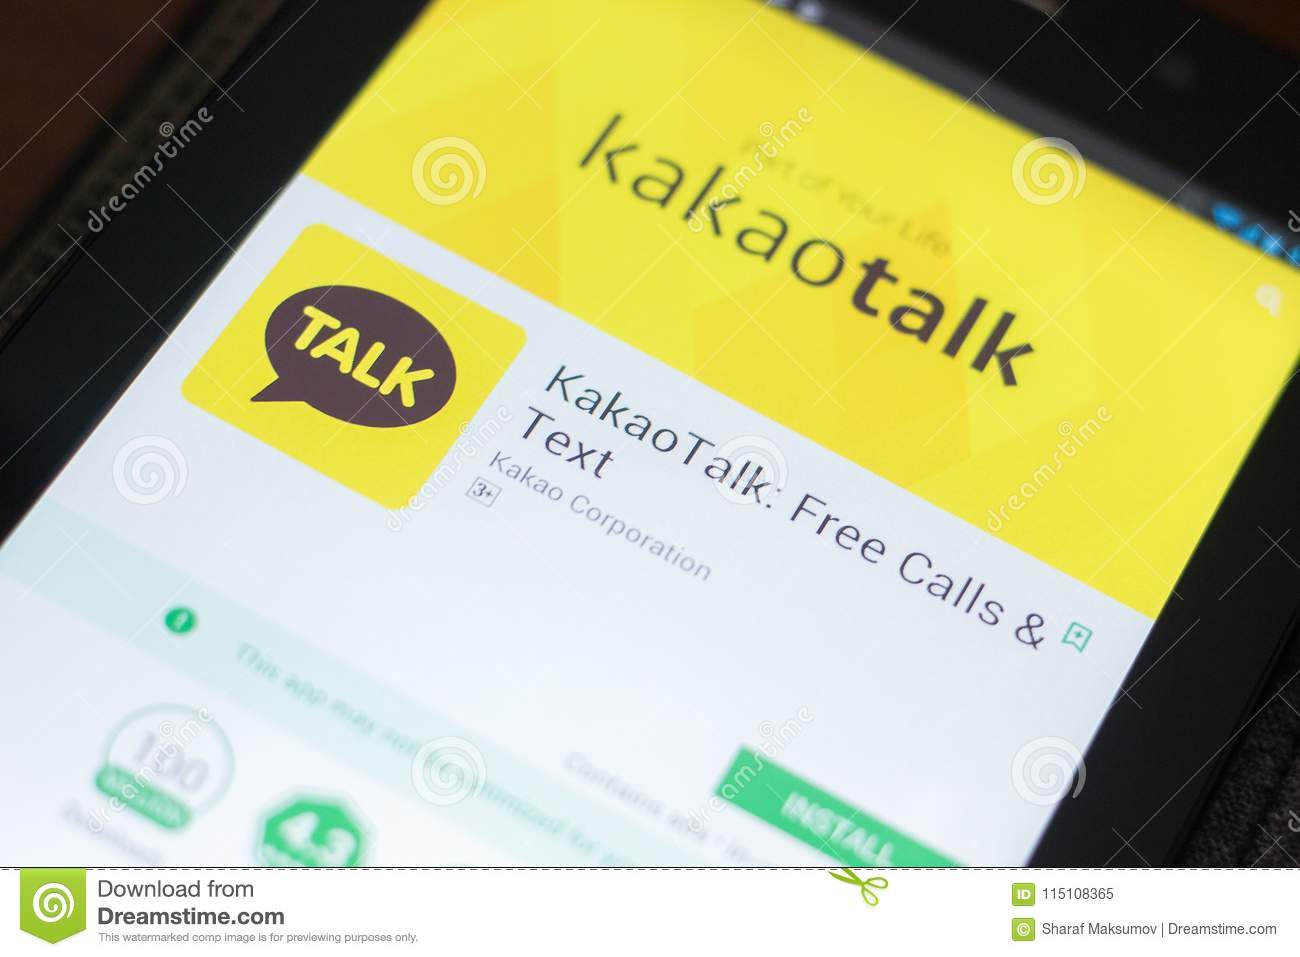 Free download kakao talk for pc